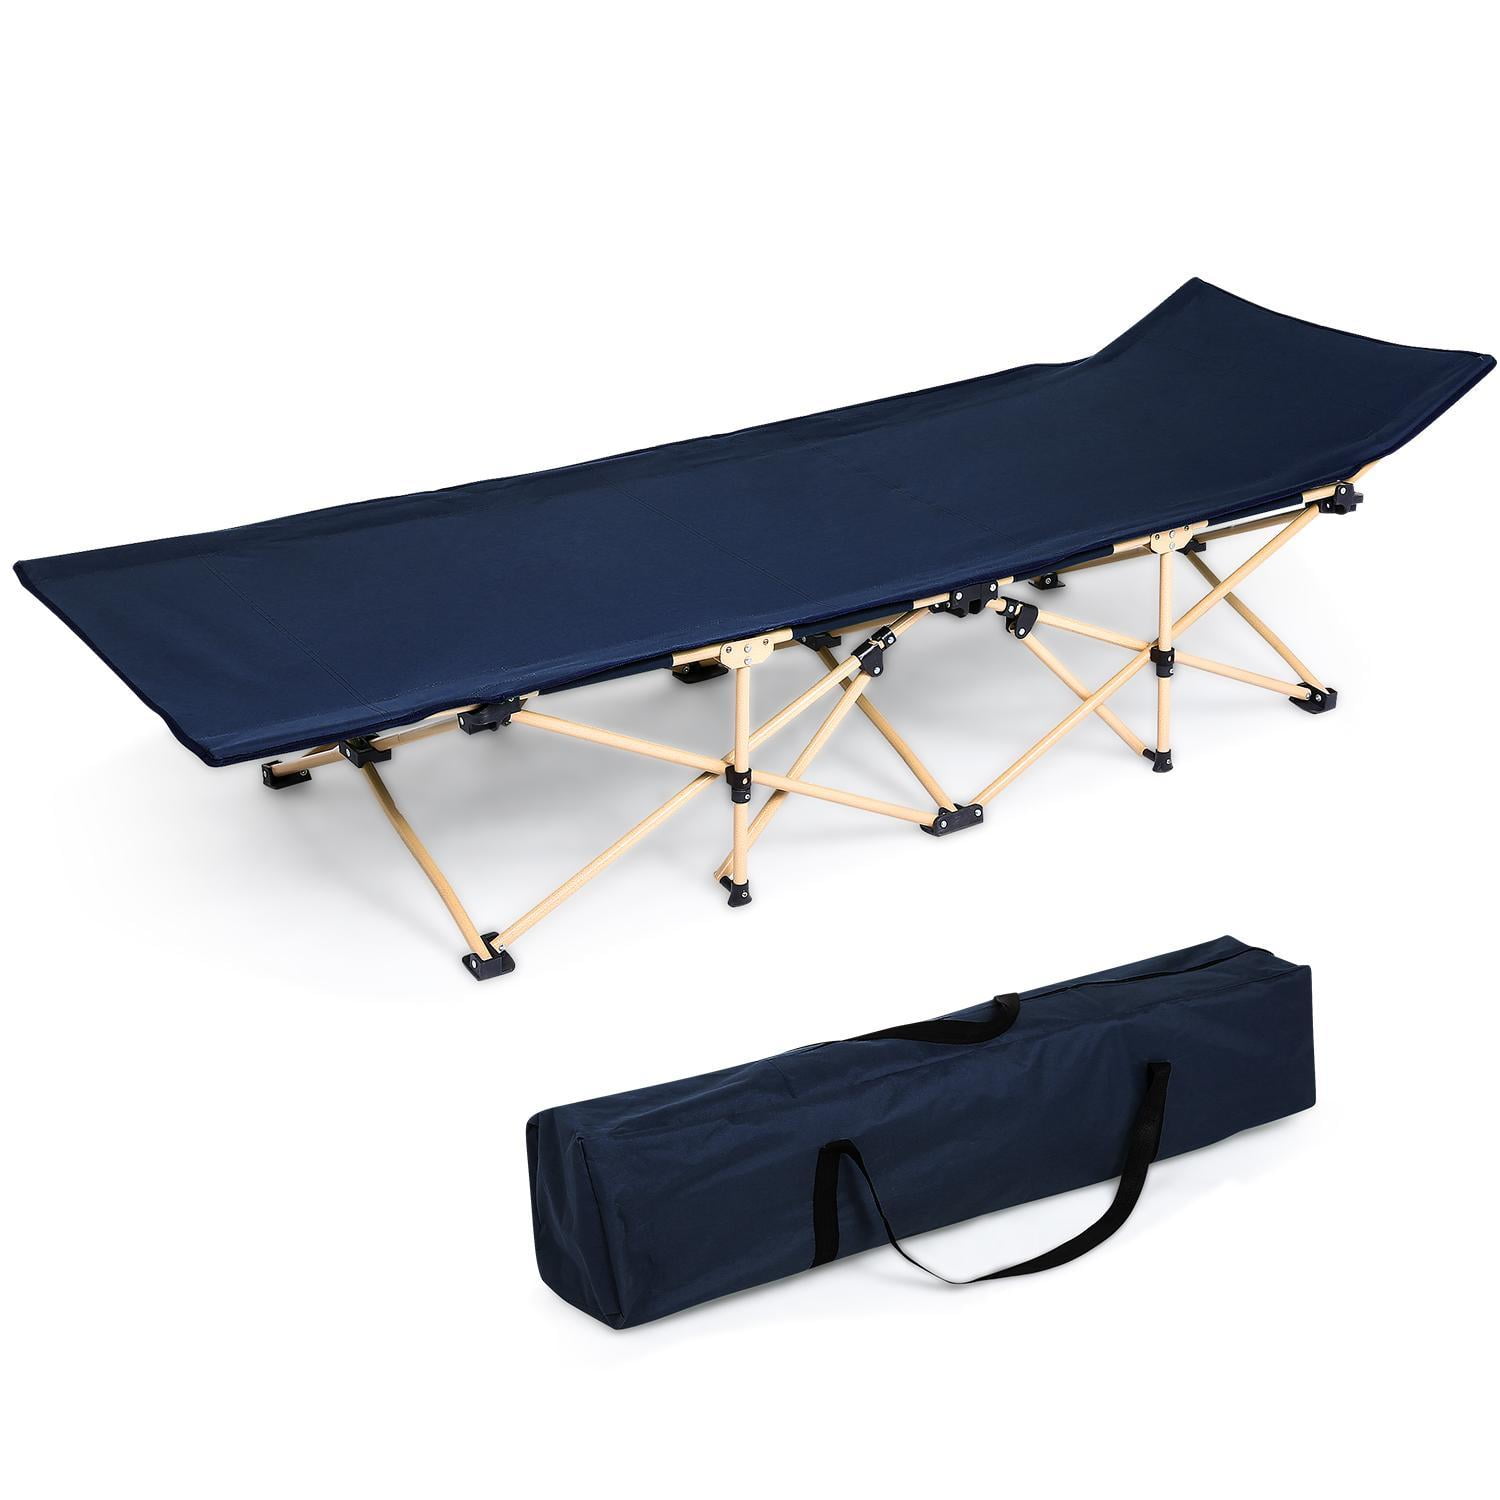 Portable Bed 260lbs Capacity Camping Cot Foldable for Adults, Camping